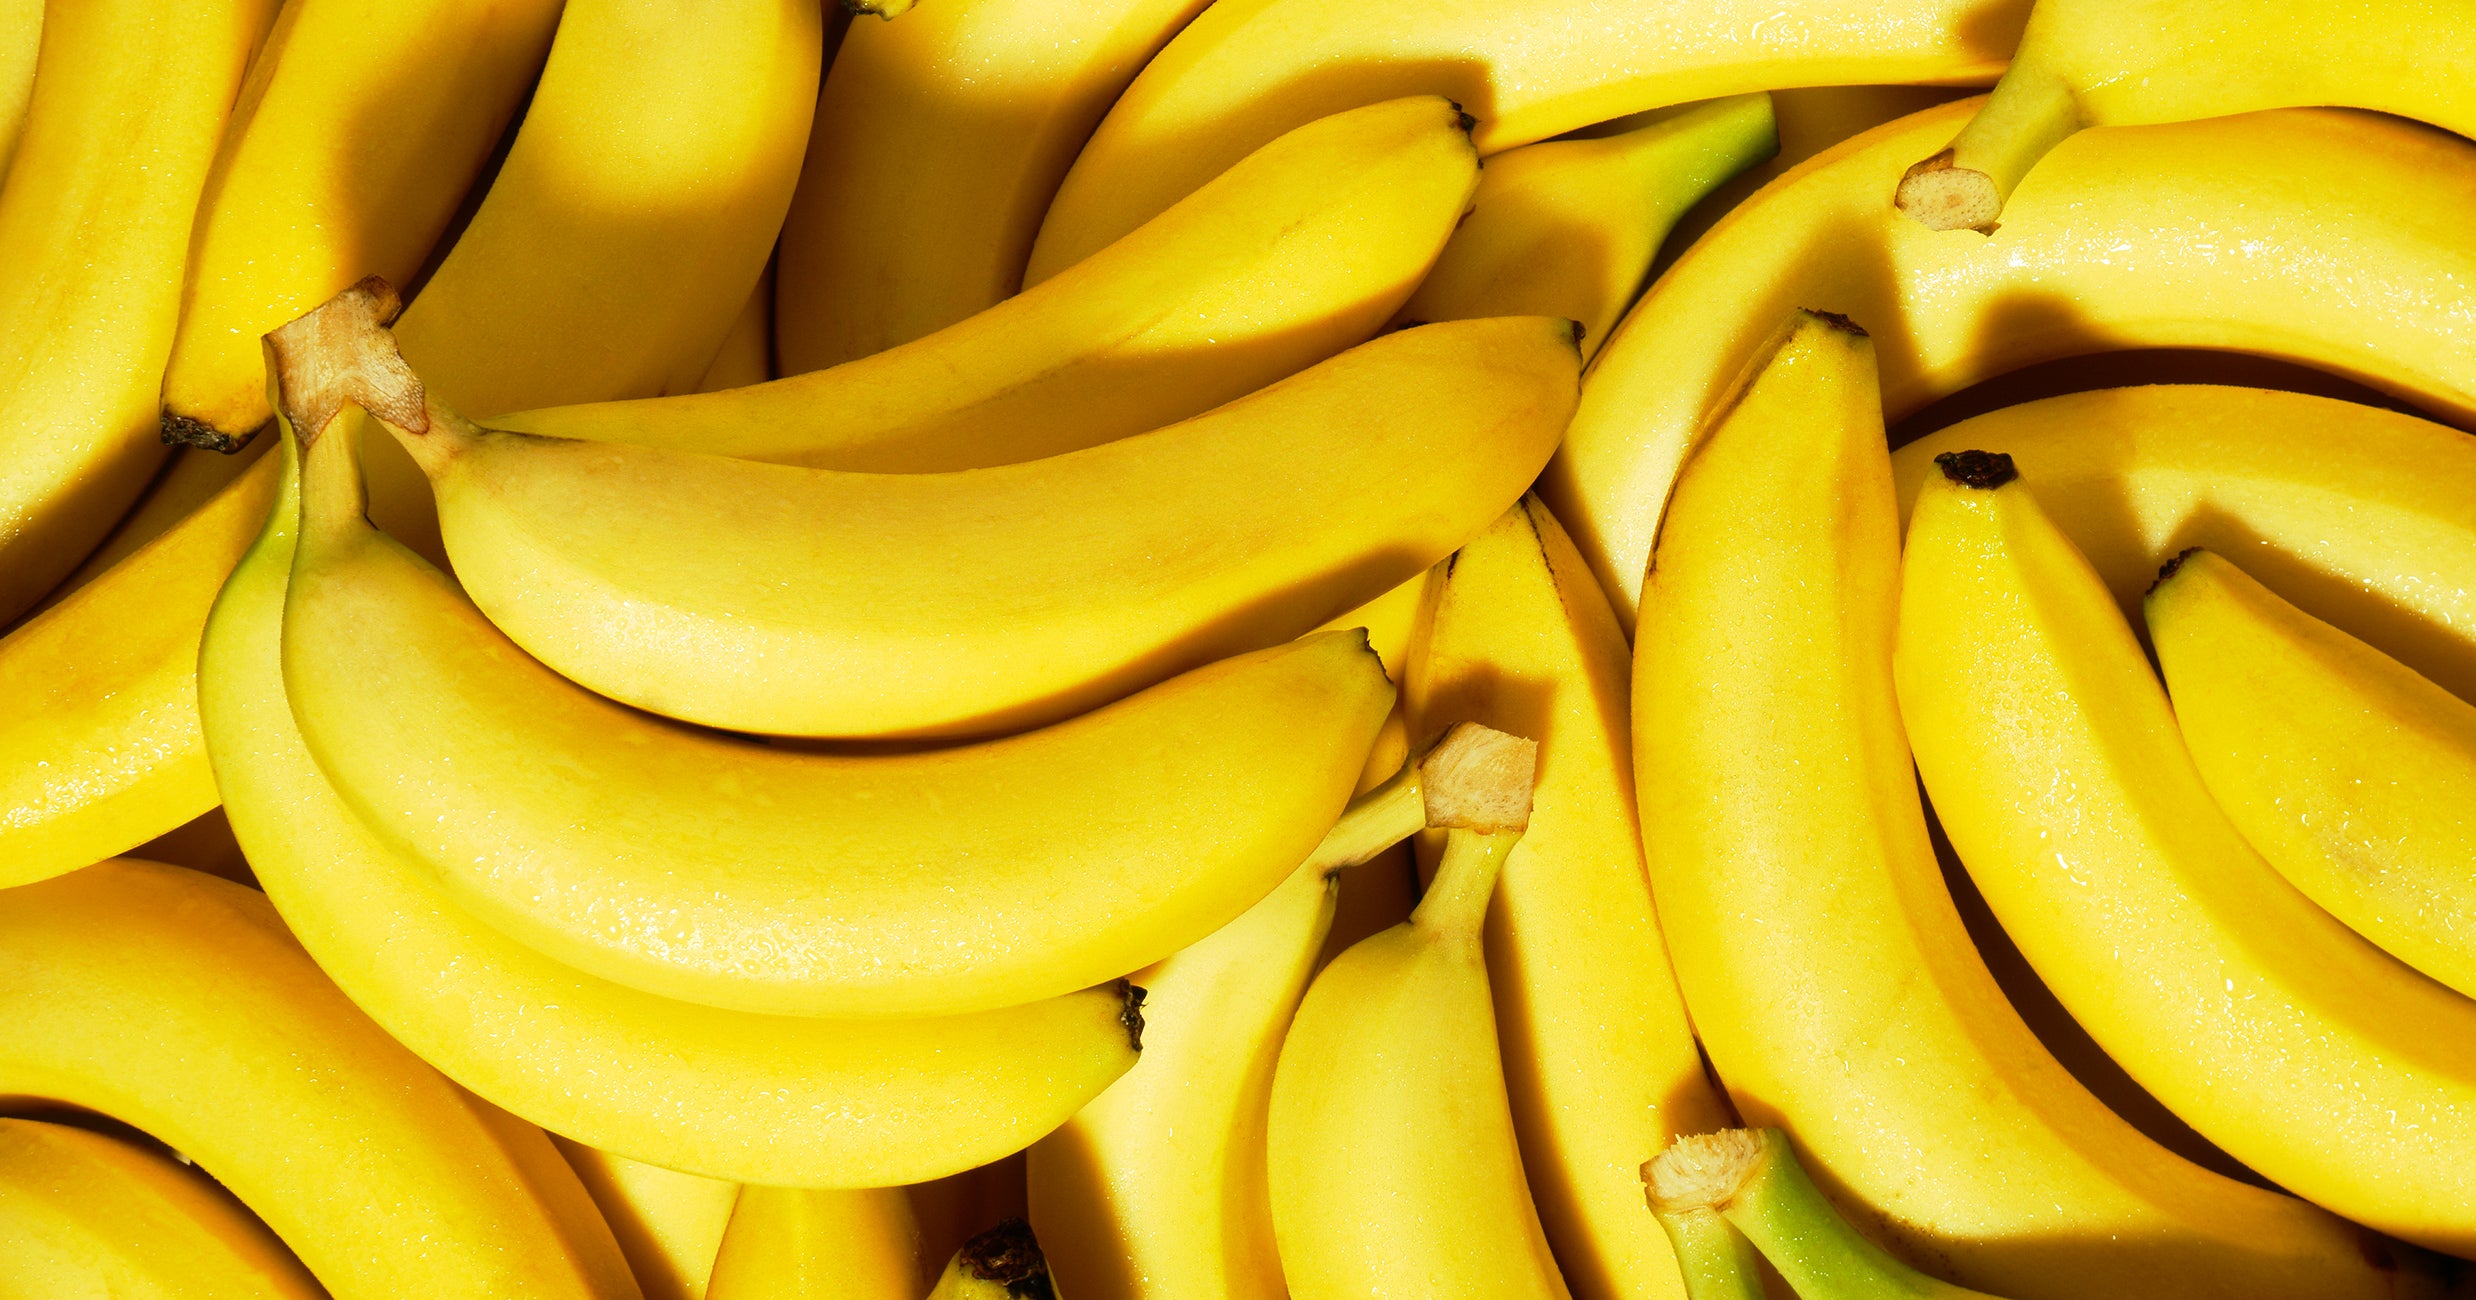 what-is-the-right-way-to-peel-eat-a-banana